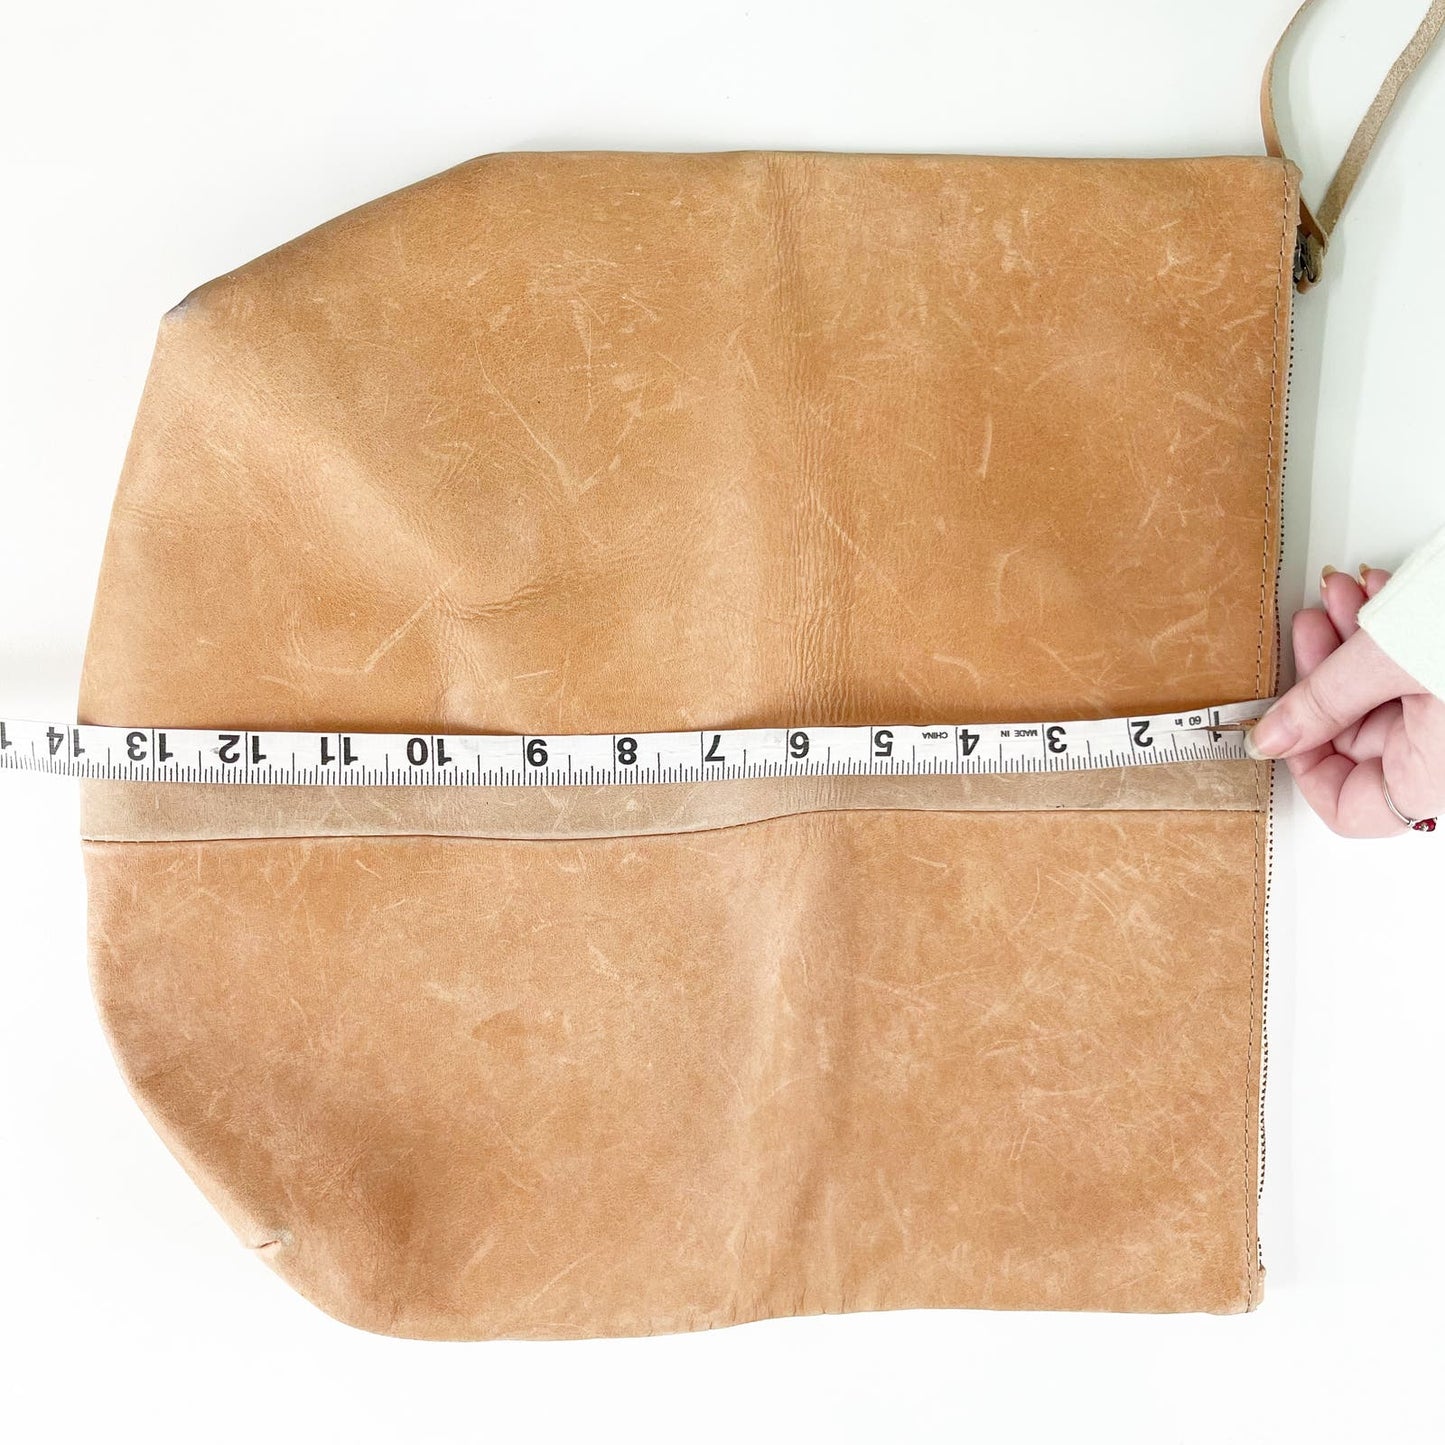 ABLE Leather Foldover Pouch Envelope Bag Clutch Purse Brown